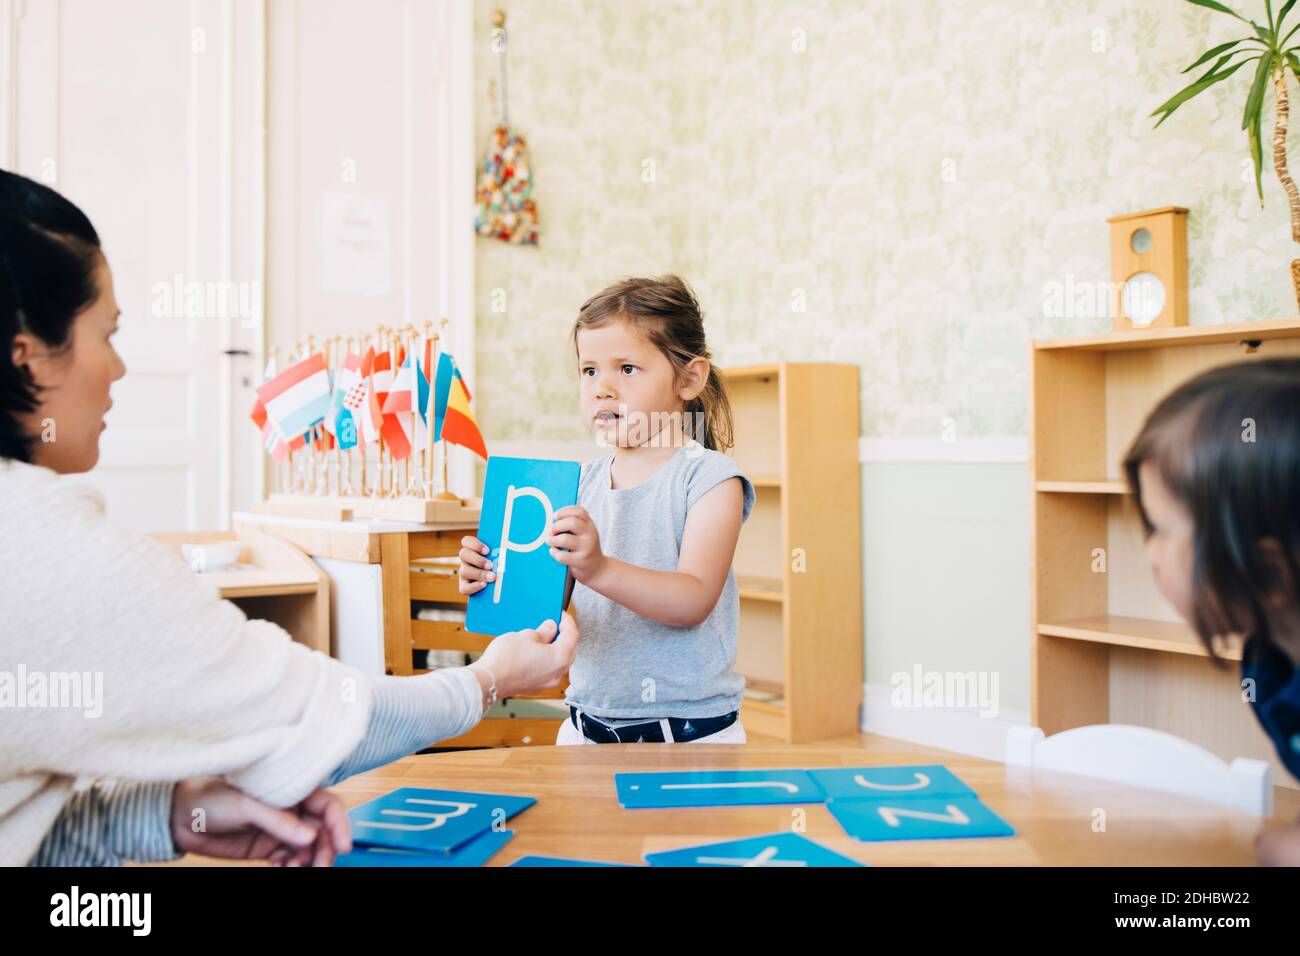 Teacher looking at girl holding letter P in classroom Stock Photo